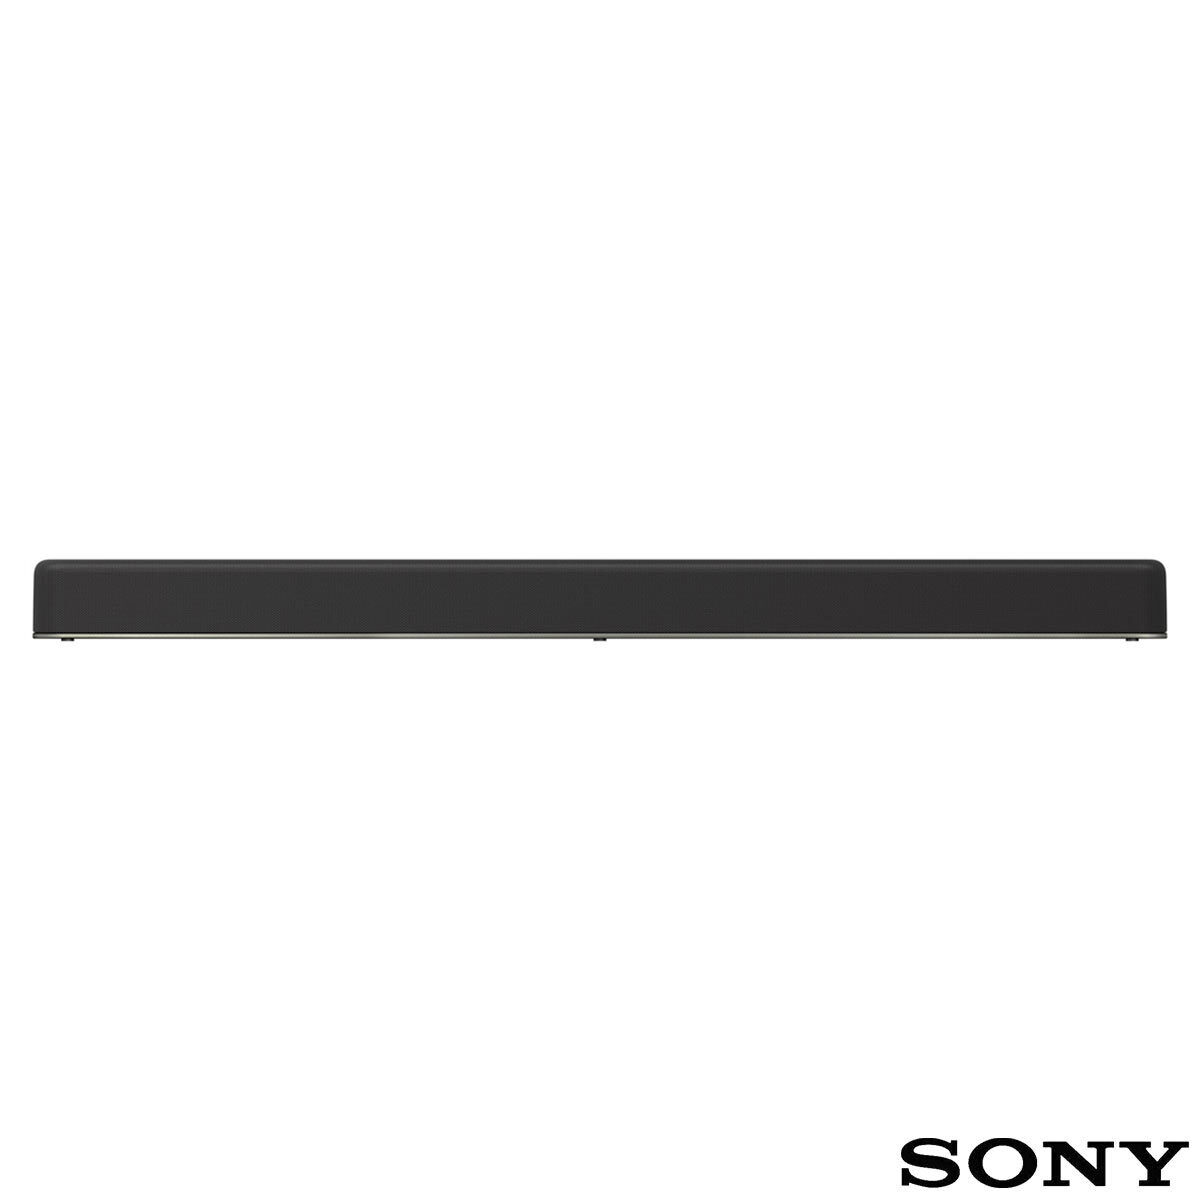 Buy Sony HTX8500, 2.1 Ch, 320W, Soundbar with Built-in Subwoofer and Bluetooth, HTX8500.CEK at Costco.co.uk